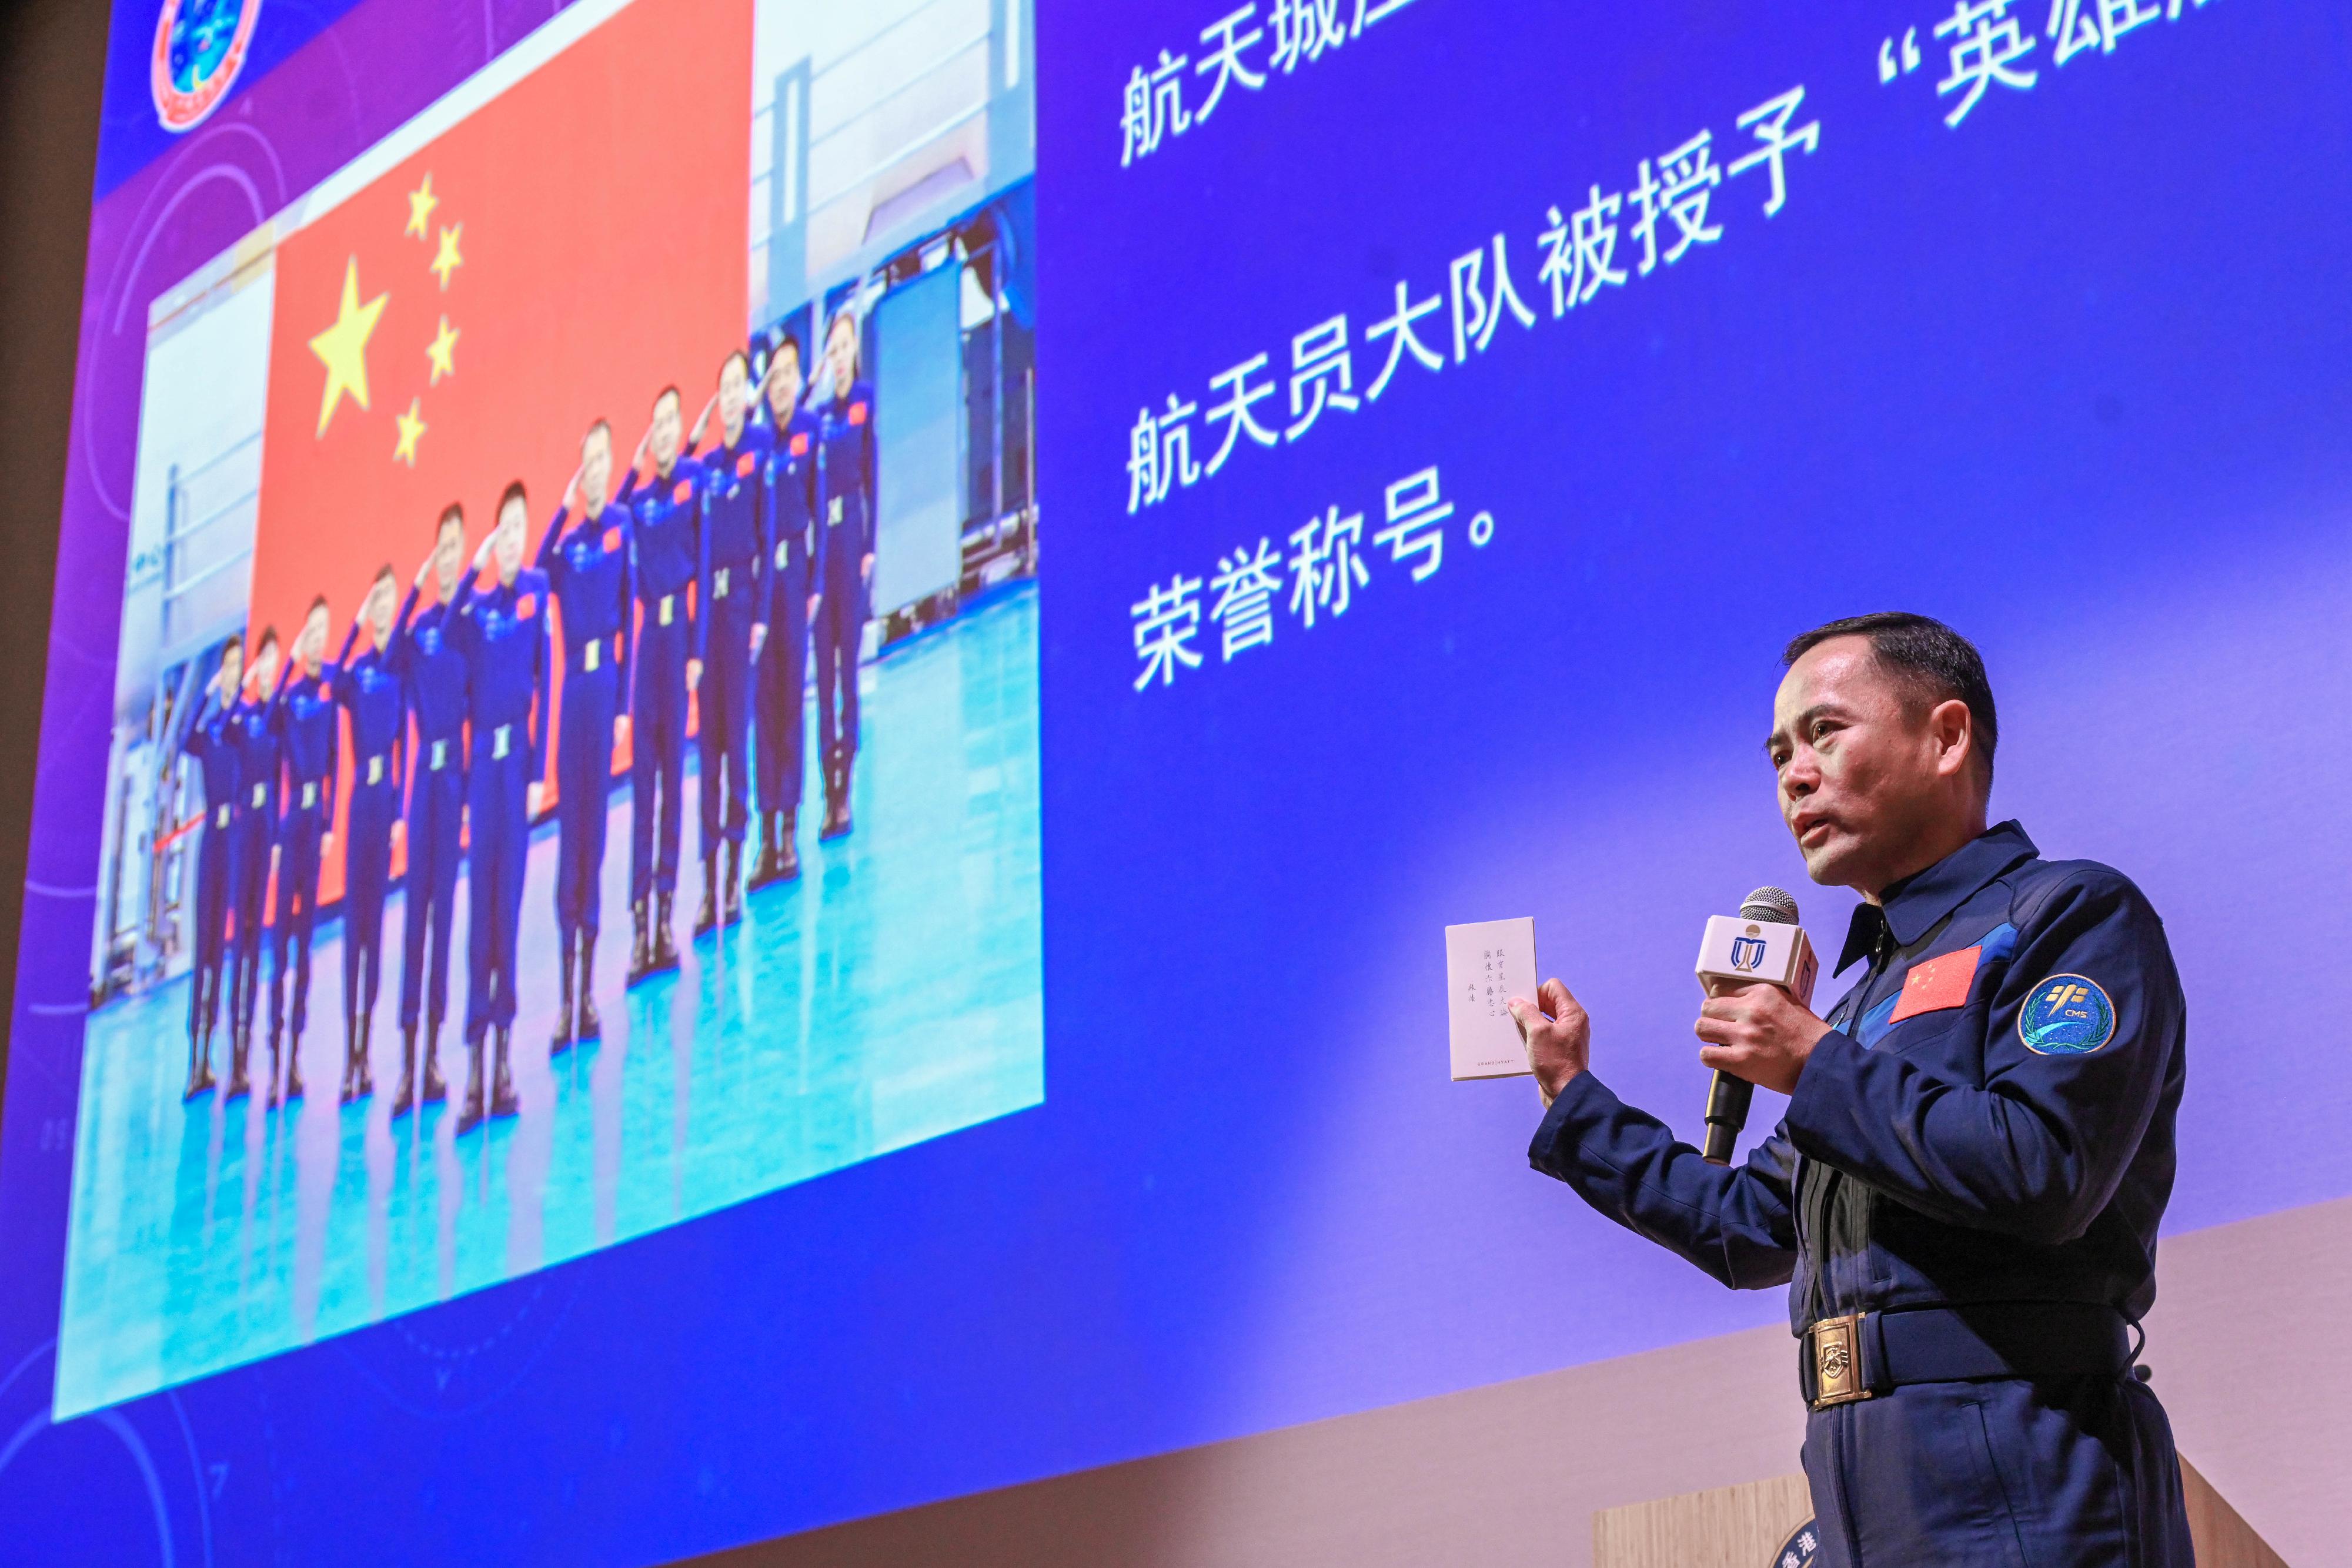 The China Manned Space delegation continued their visit to Hong Kong today (November 30). Photo shows Shenzhou-15 astronaut Mr Zhang Lu attending the dialogue session with teachers and students held at the Hong Kong University of Science and Technology.